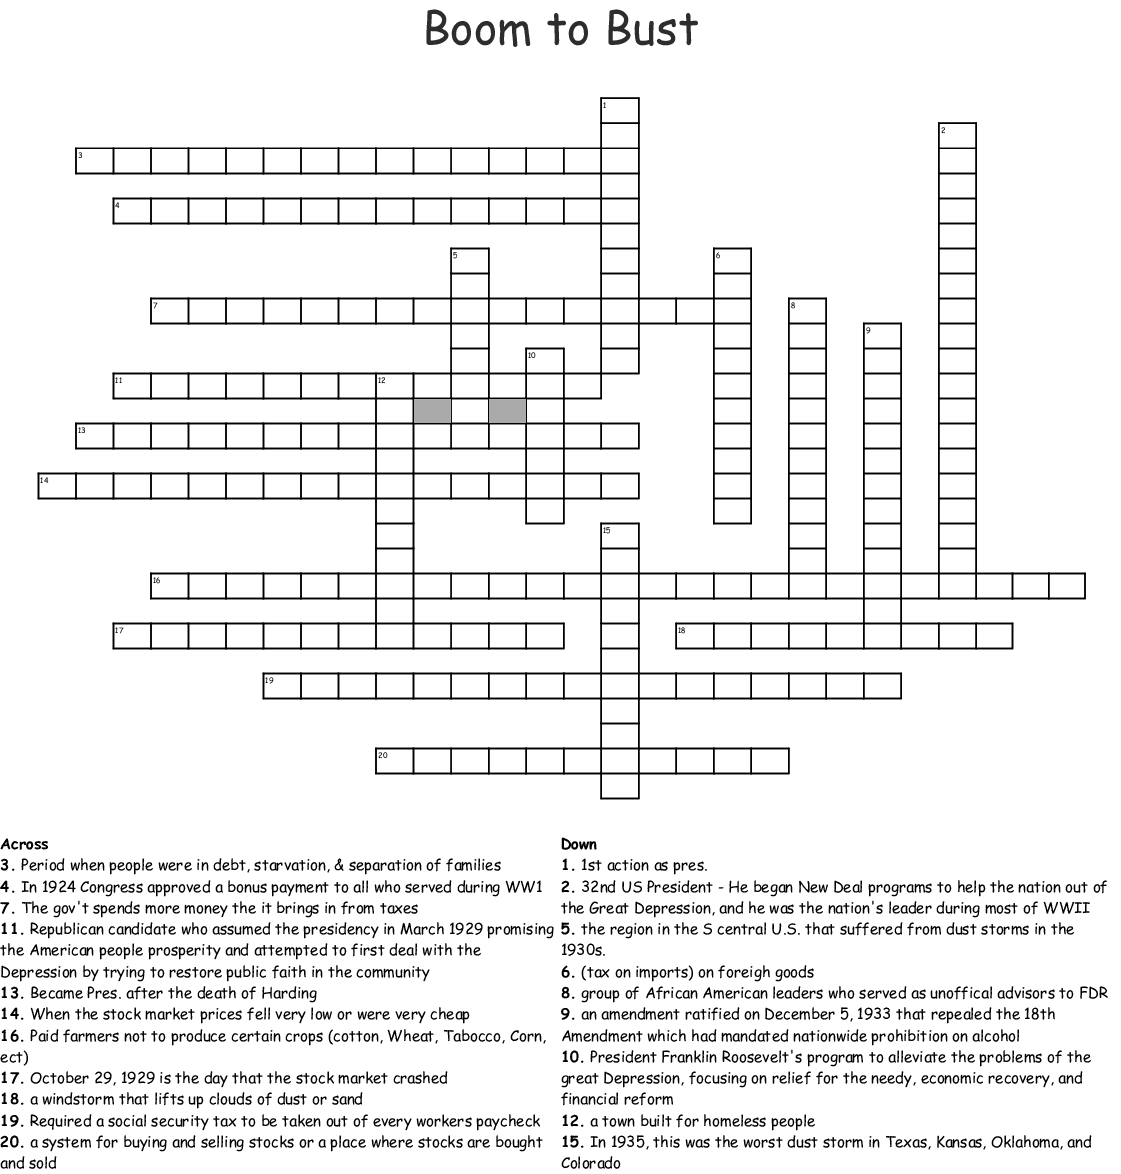 boom-to-bust-crossword-word-db-excel